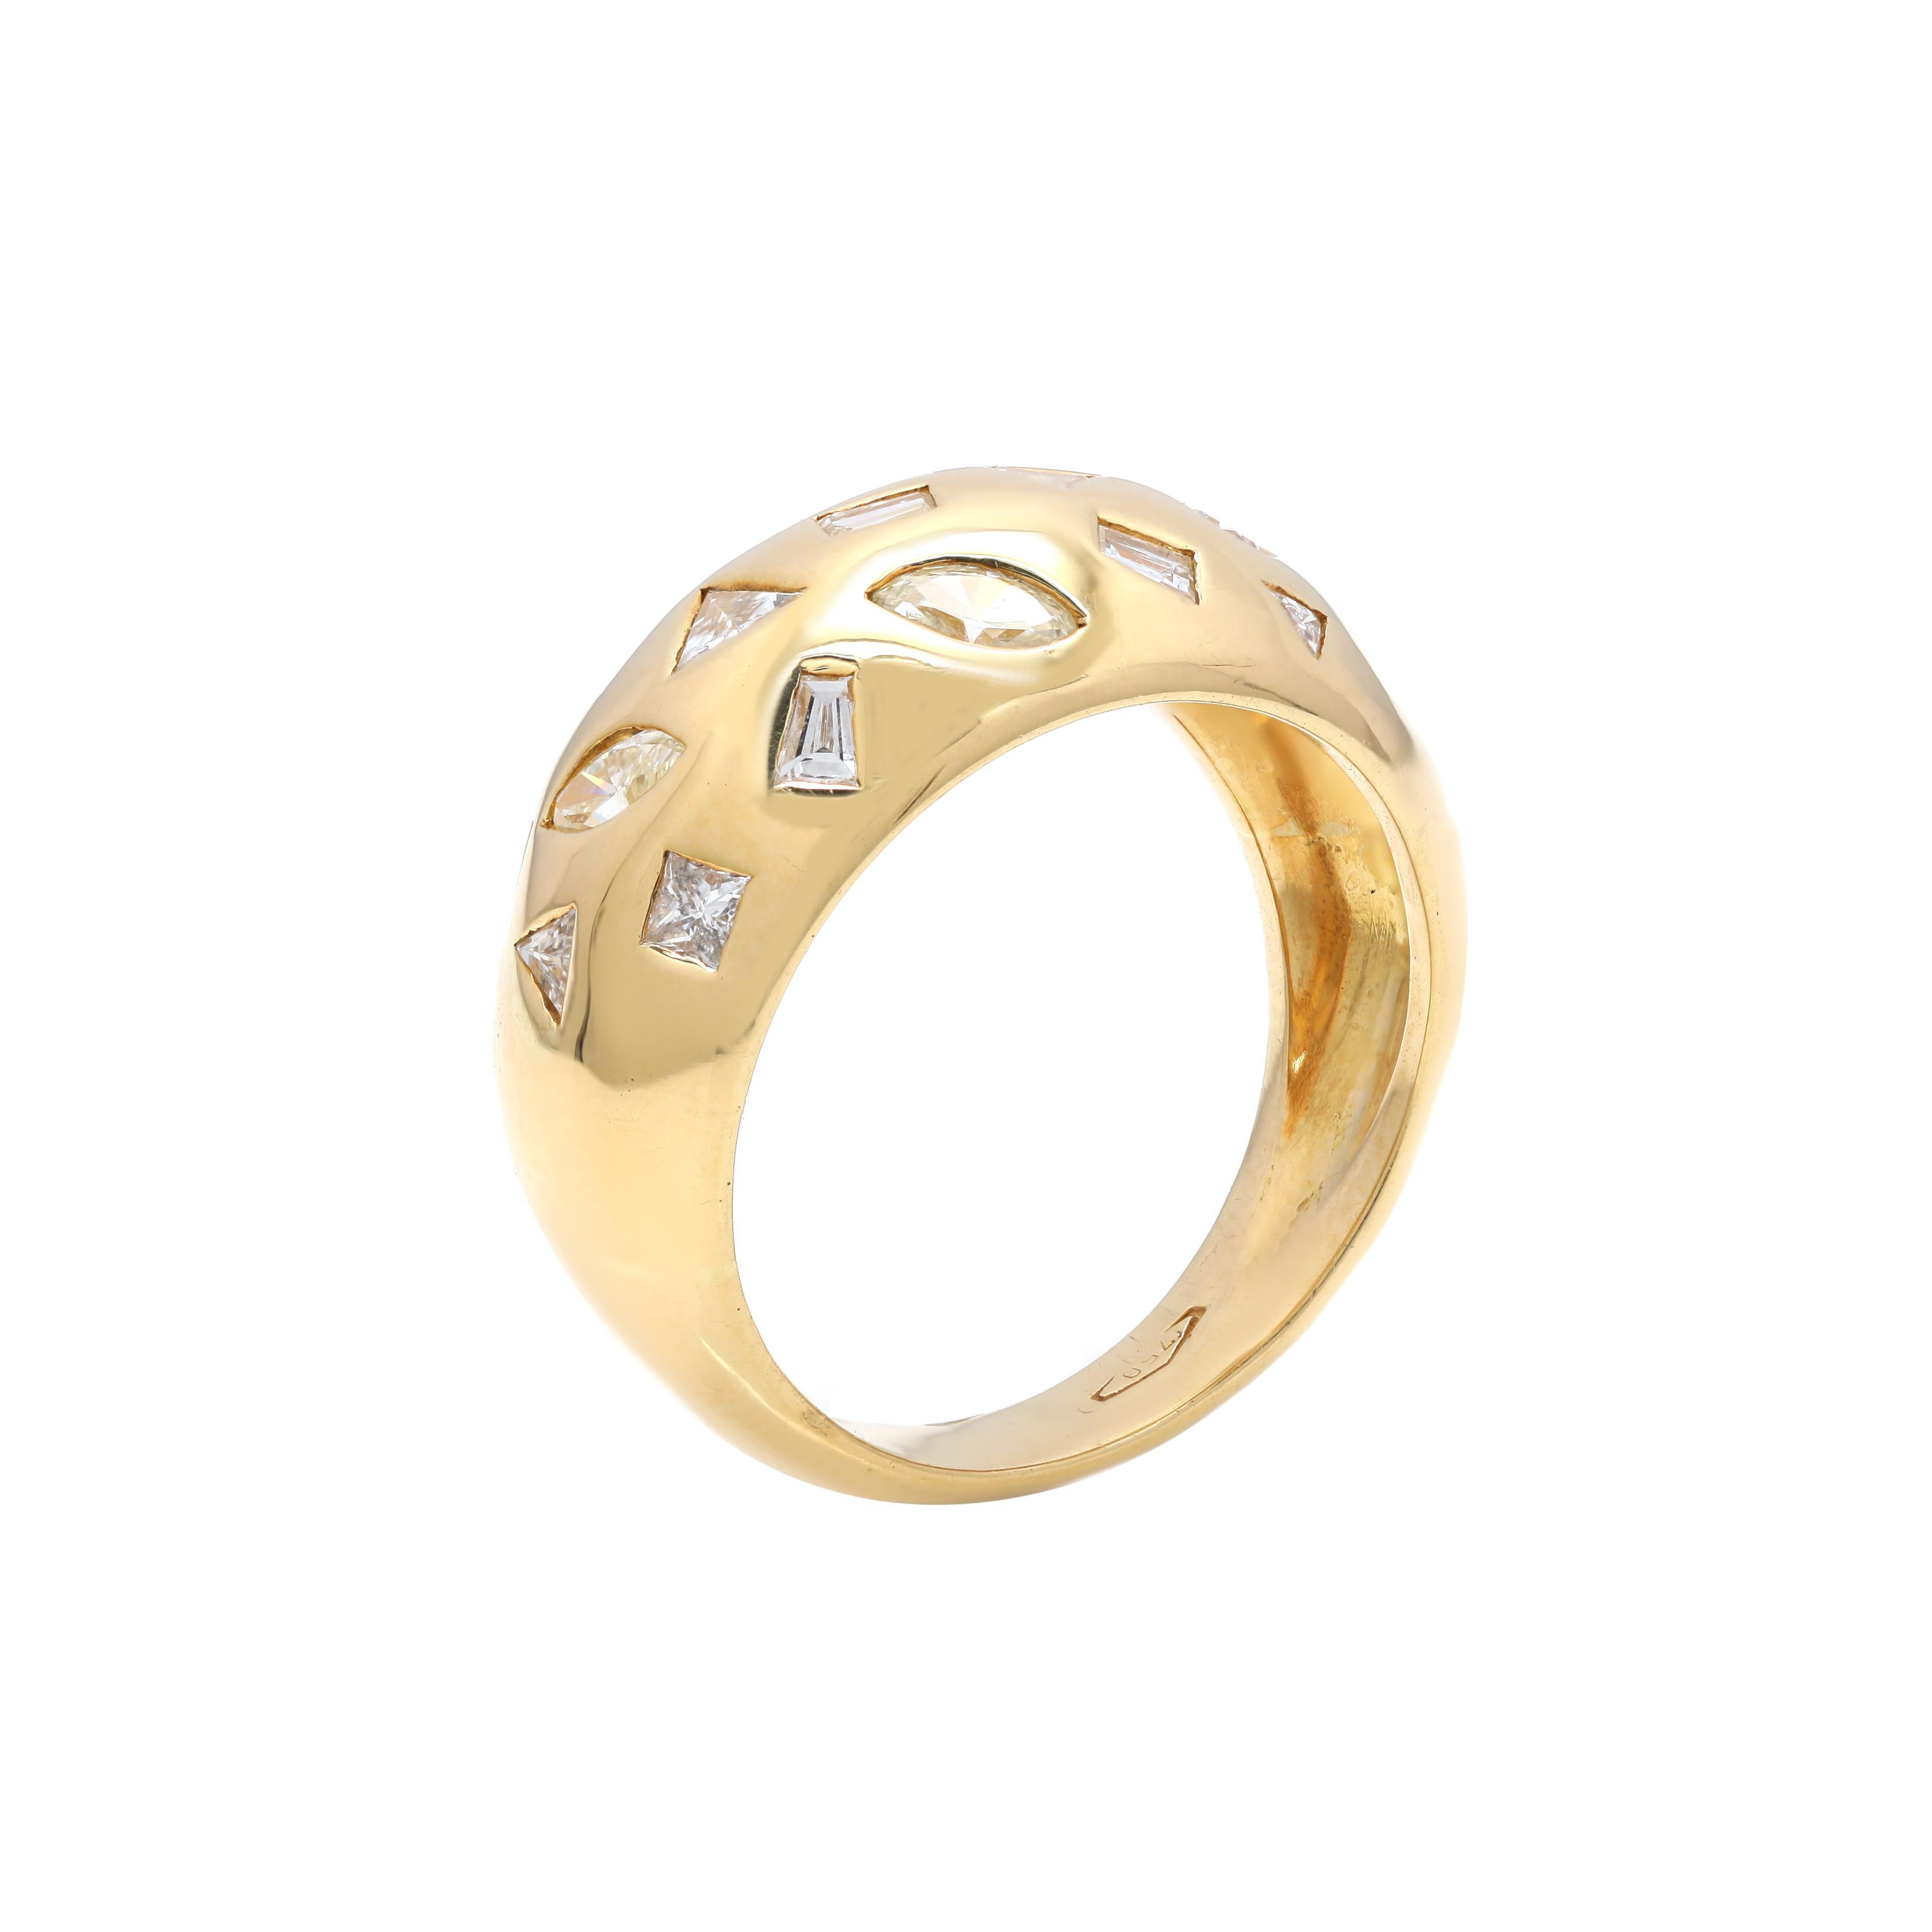 For Sale:  Genuine Diamond Celestial Dome Ring in Solid 18K Yellow Gold for Him 4